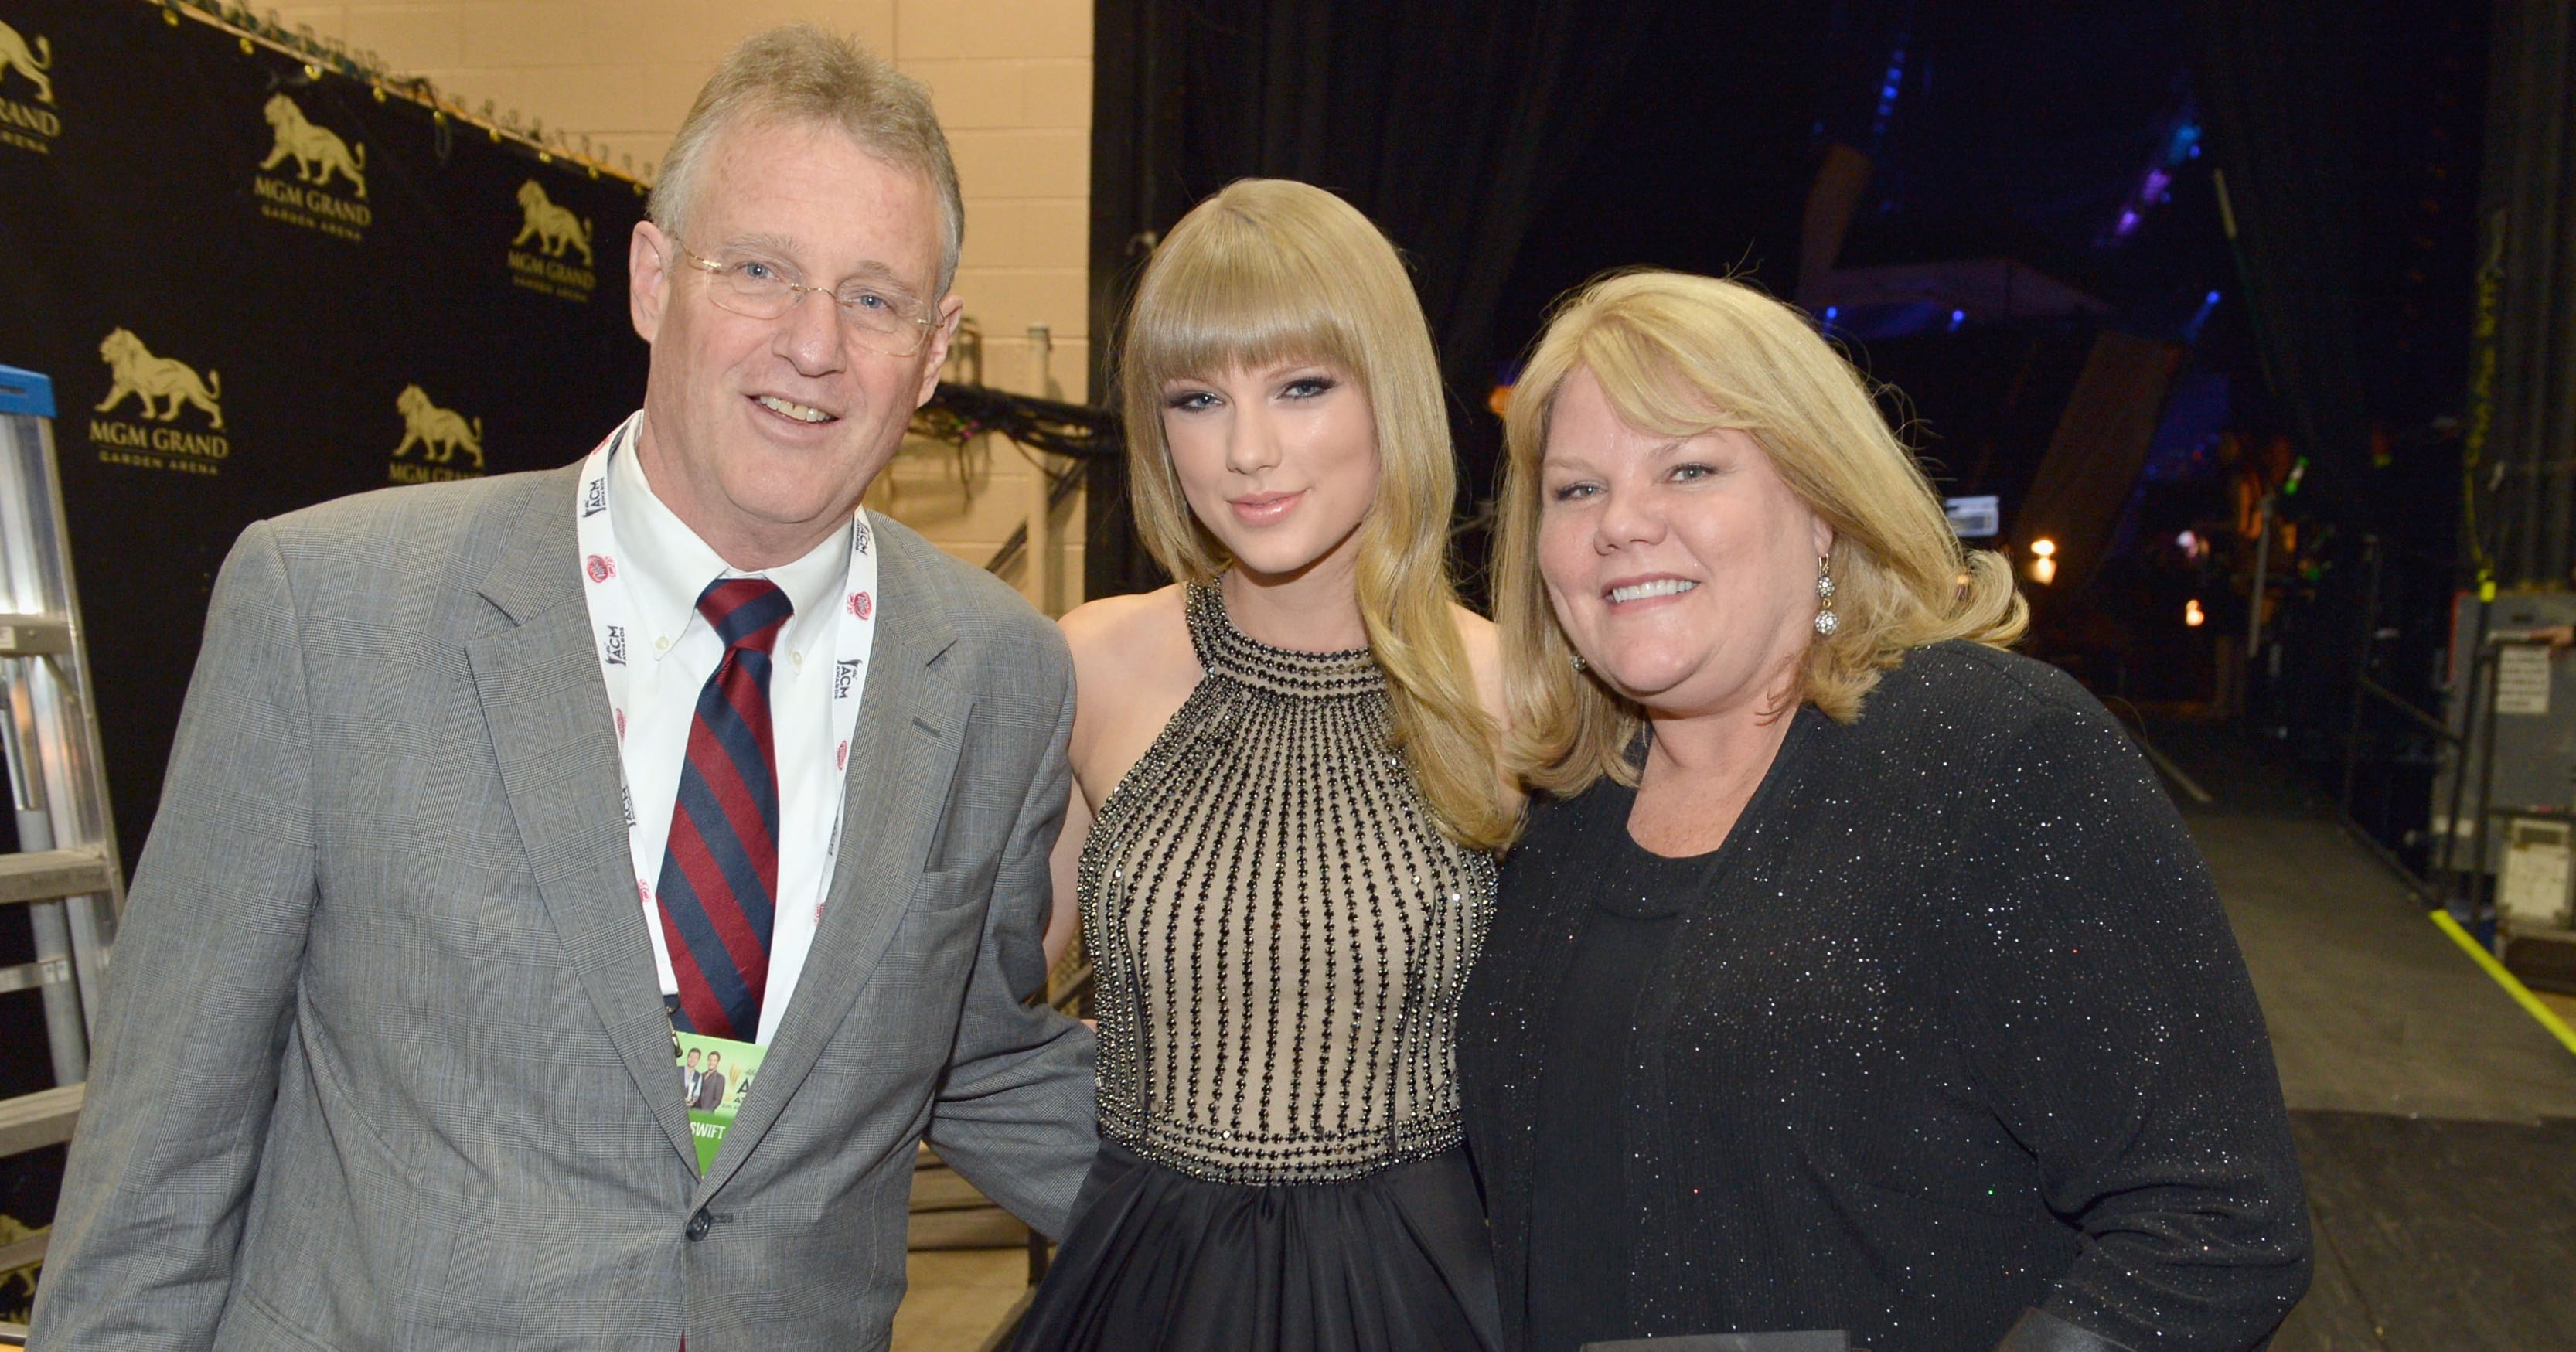 Who Are Taylor Swift’s Parents?